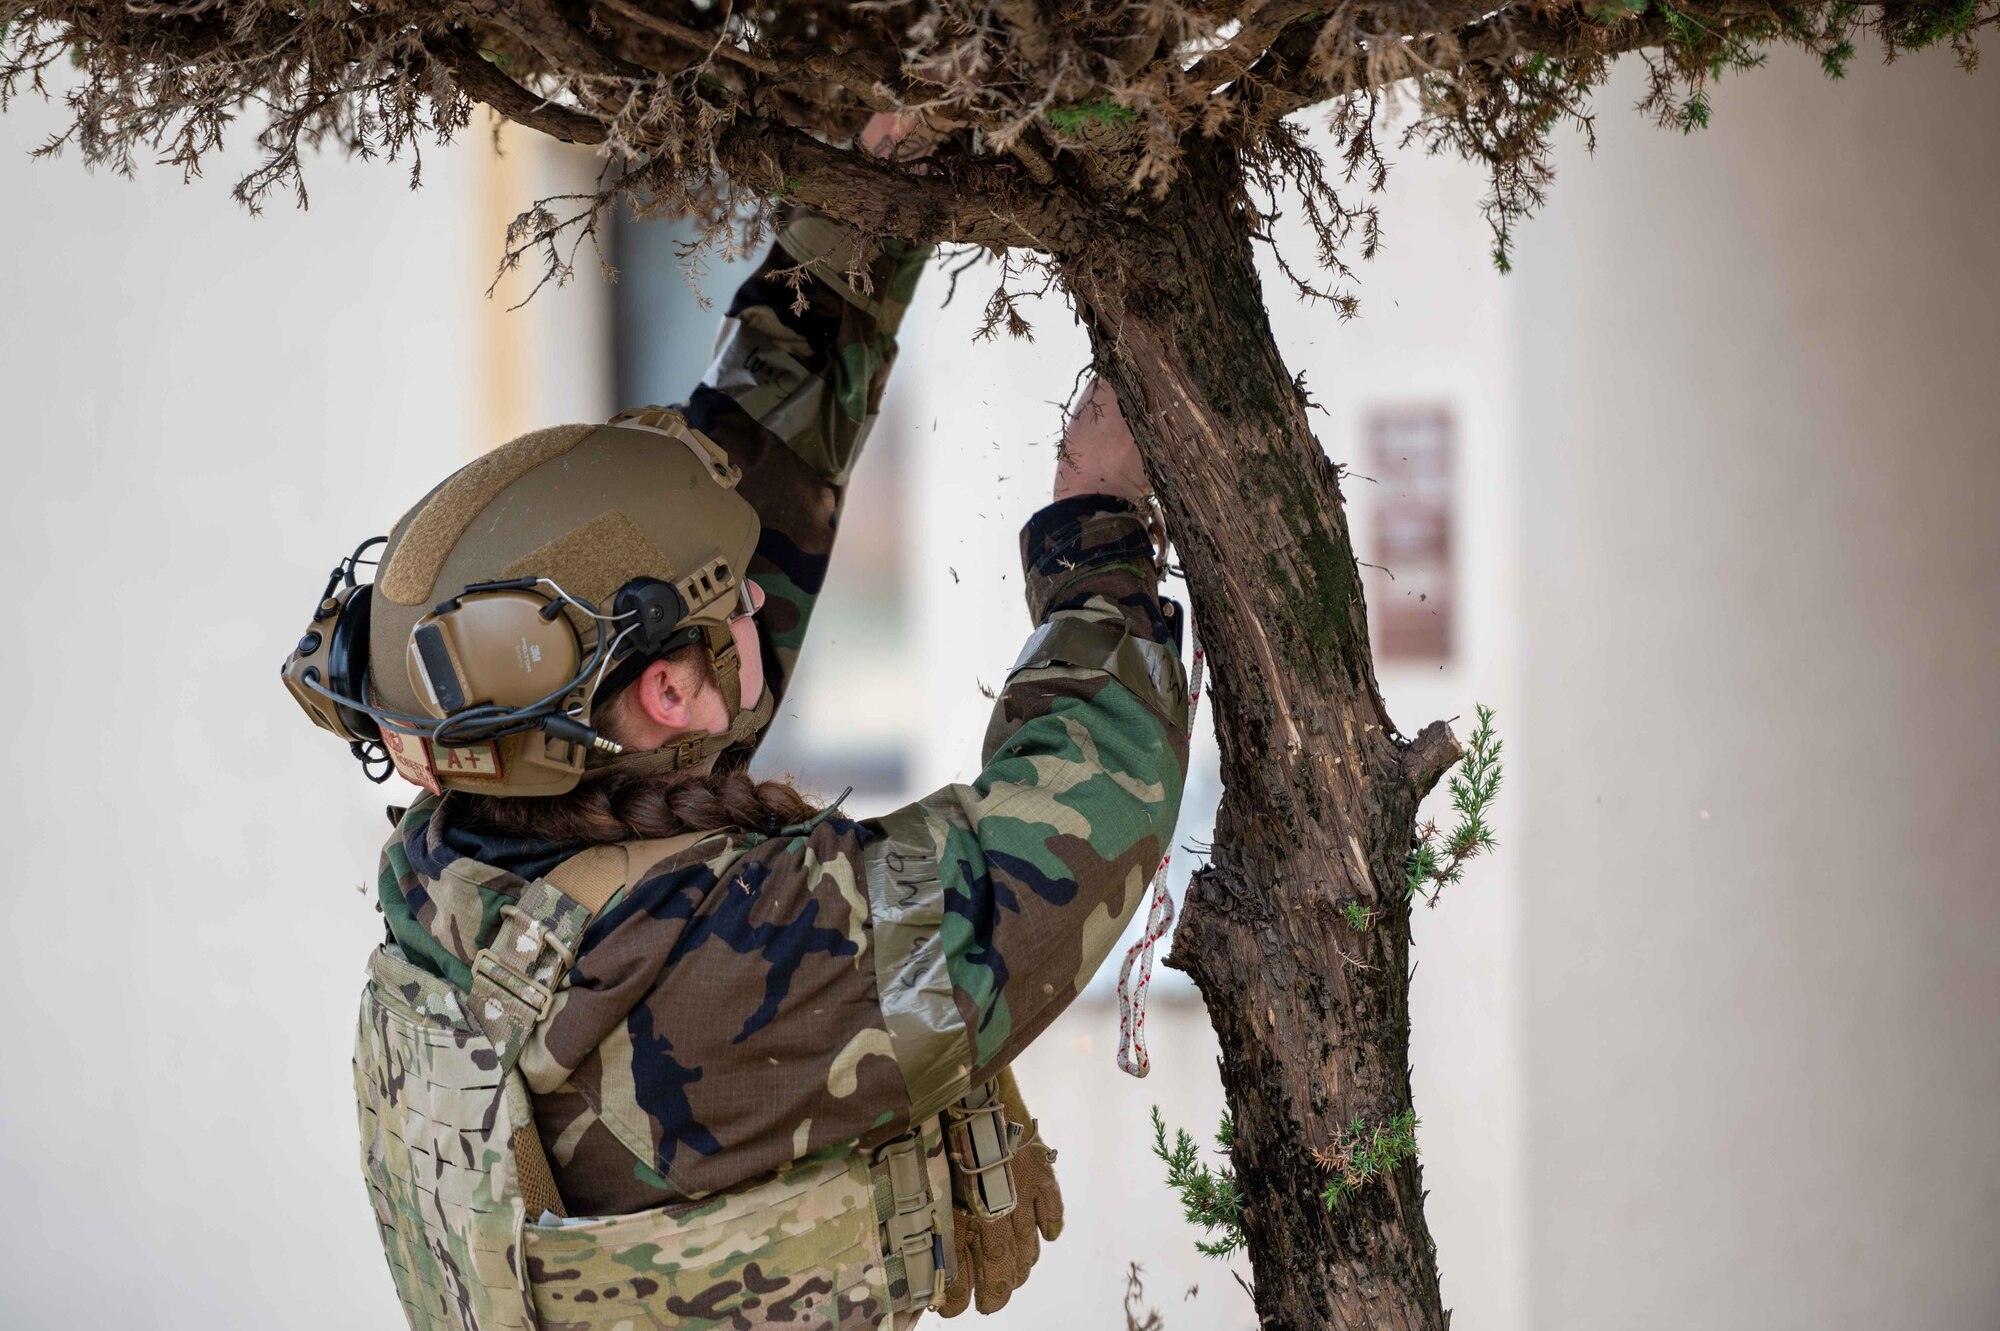 Senior Airman Janie Roberts, 51st Civil Engineer Squadron explosive ordnance disposal (EOD) team lead, attaches a rope and pulley to a tree branch above a simulated unexploded ordnance (UXO) during a base-wide training event at Osan Air Base